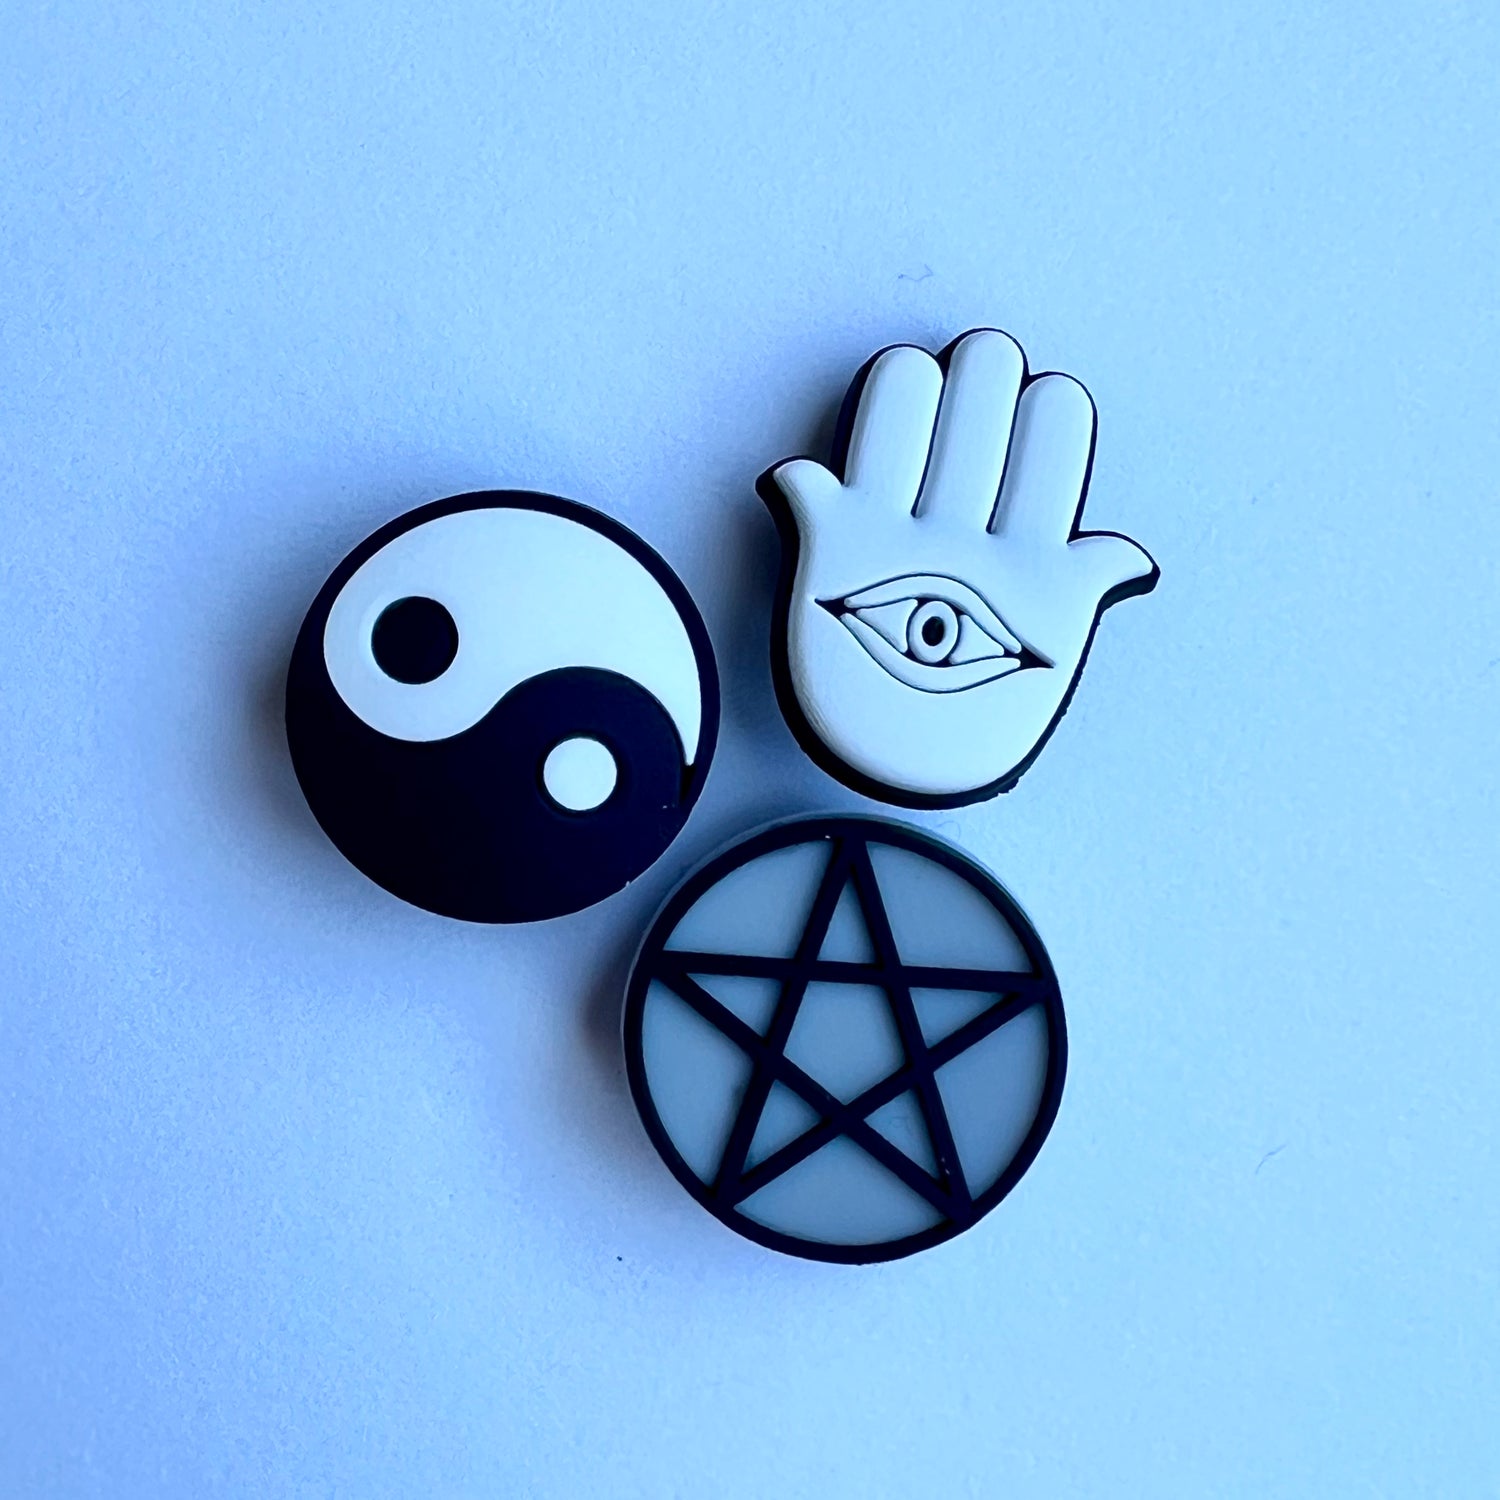 The Pentagram Charms Pack